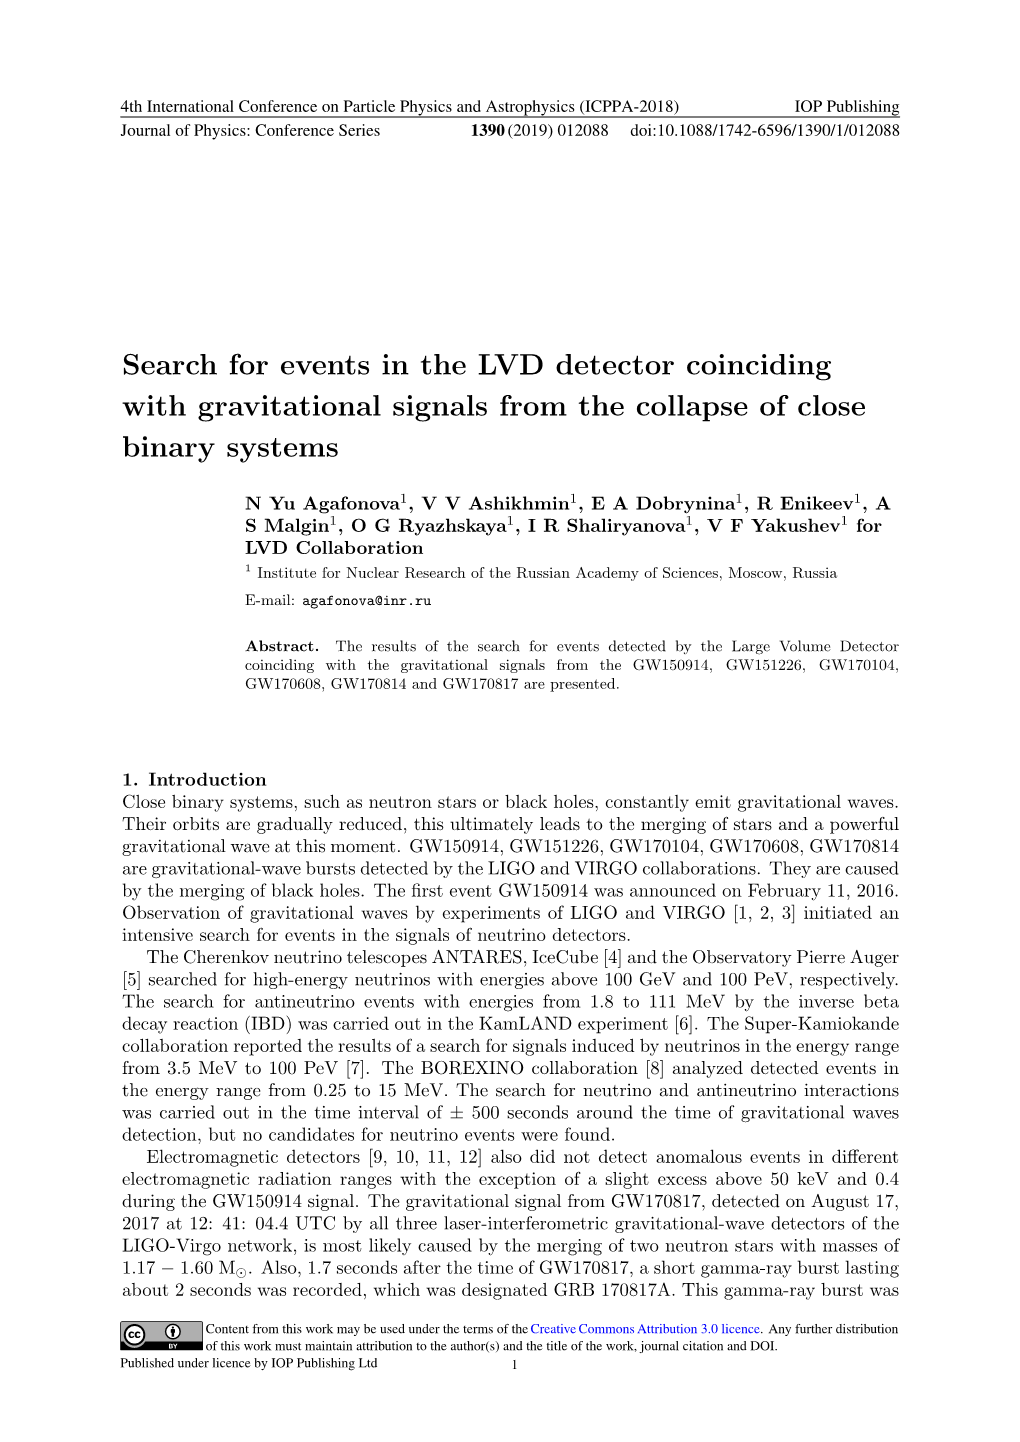 Search for Events in the LVD Detector Coinciding with Gravitational Signals from the Collapse of Close Binary Systems